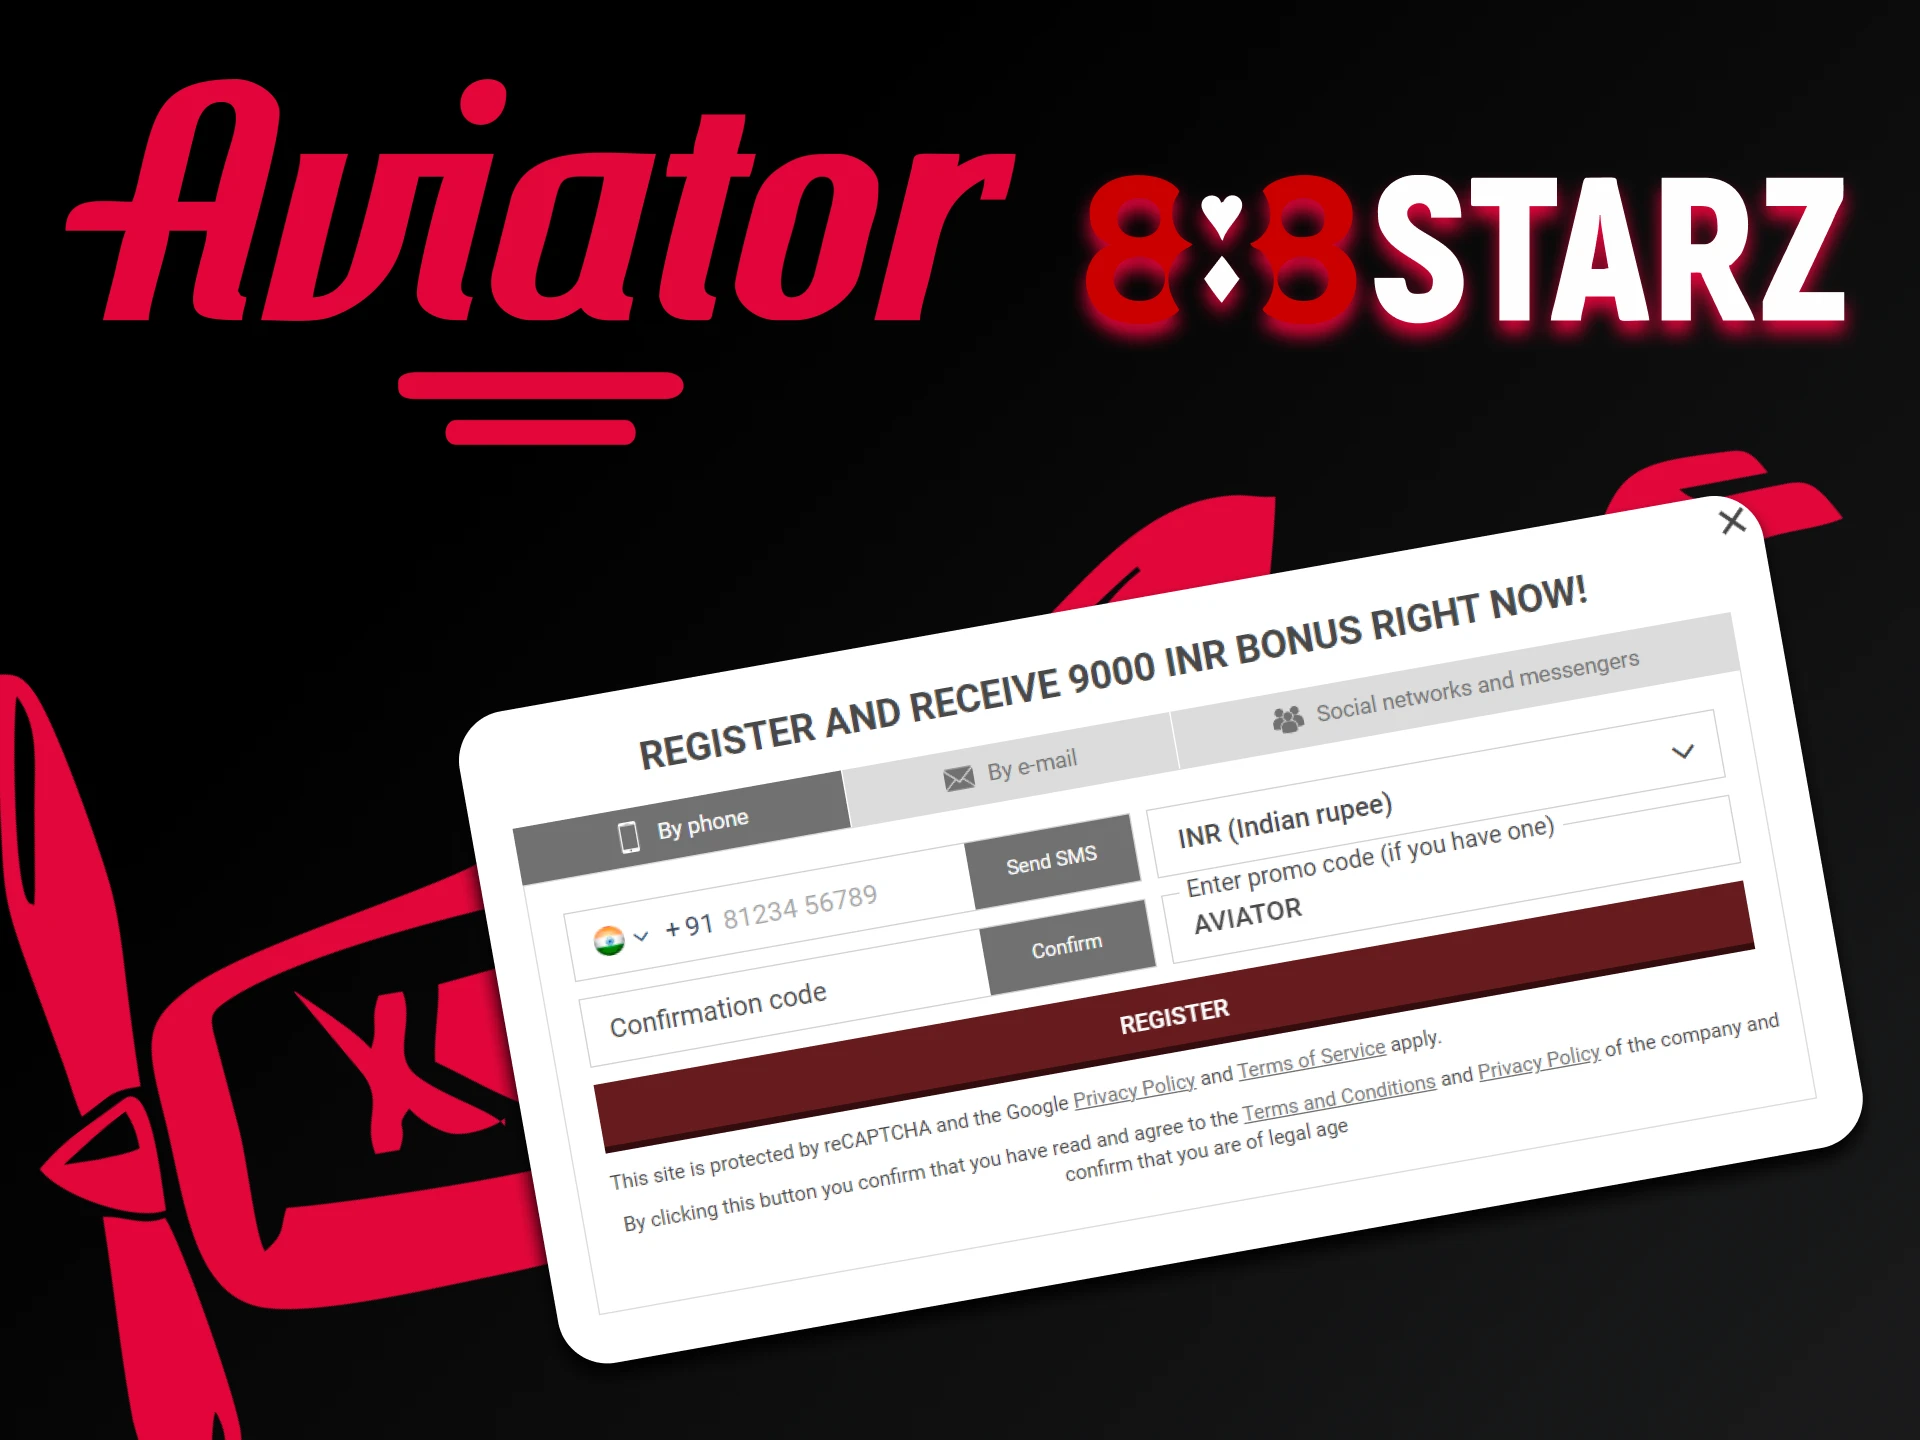 Go through the registration process on 888starz to play Aviator.